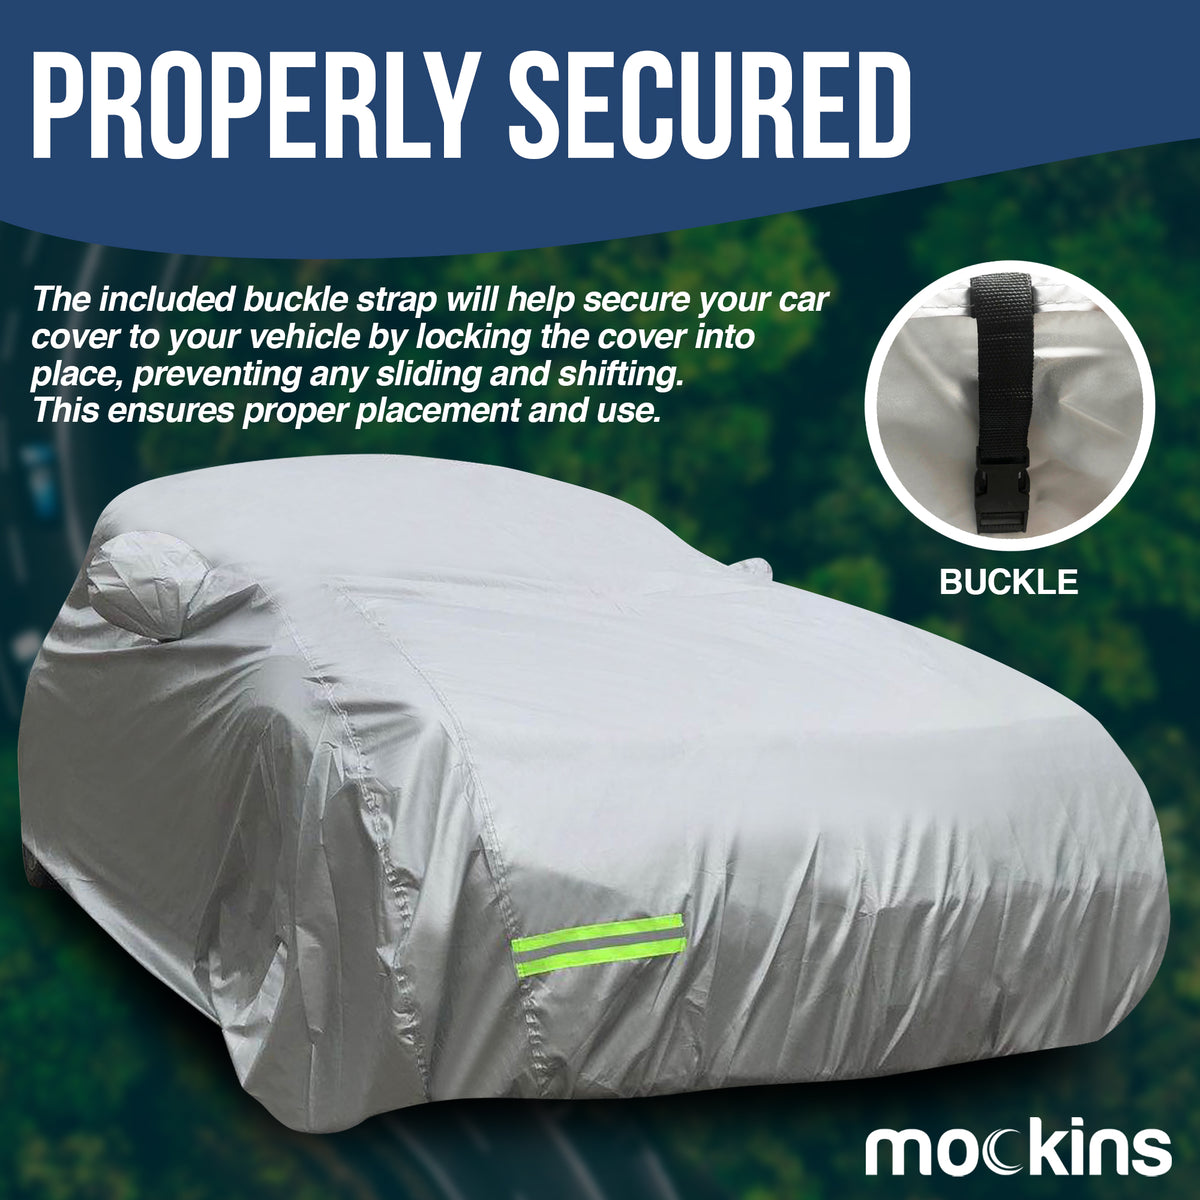 Included Buckle Strap Will Help Secure Your Car Cover And Ensures Proper Placement And Use